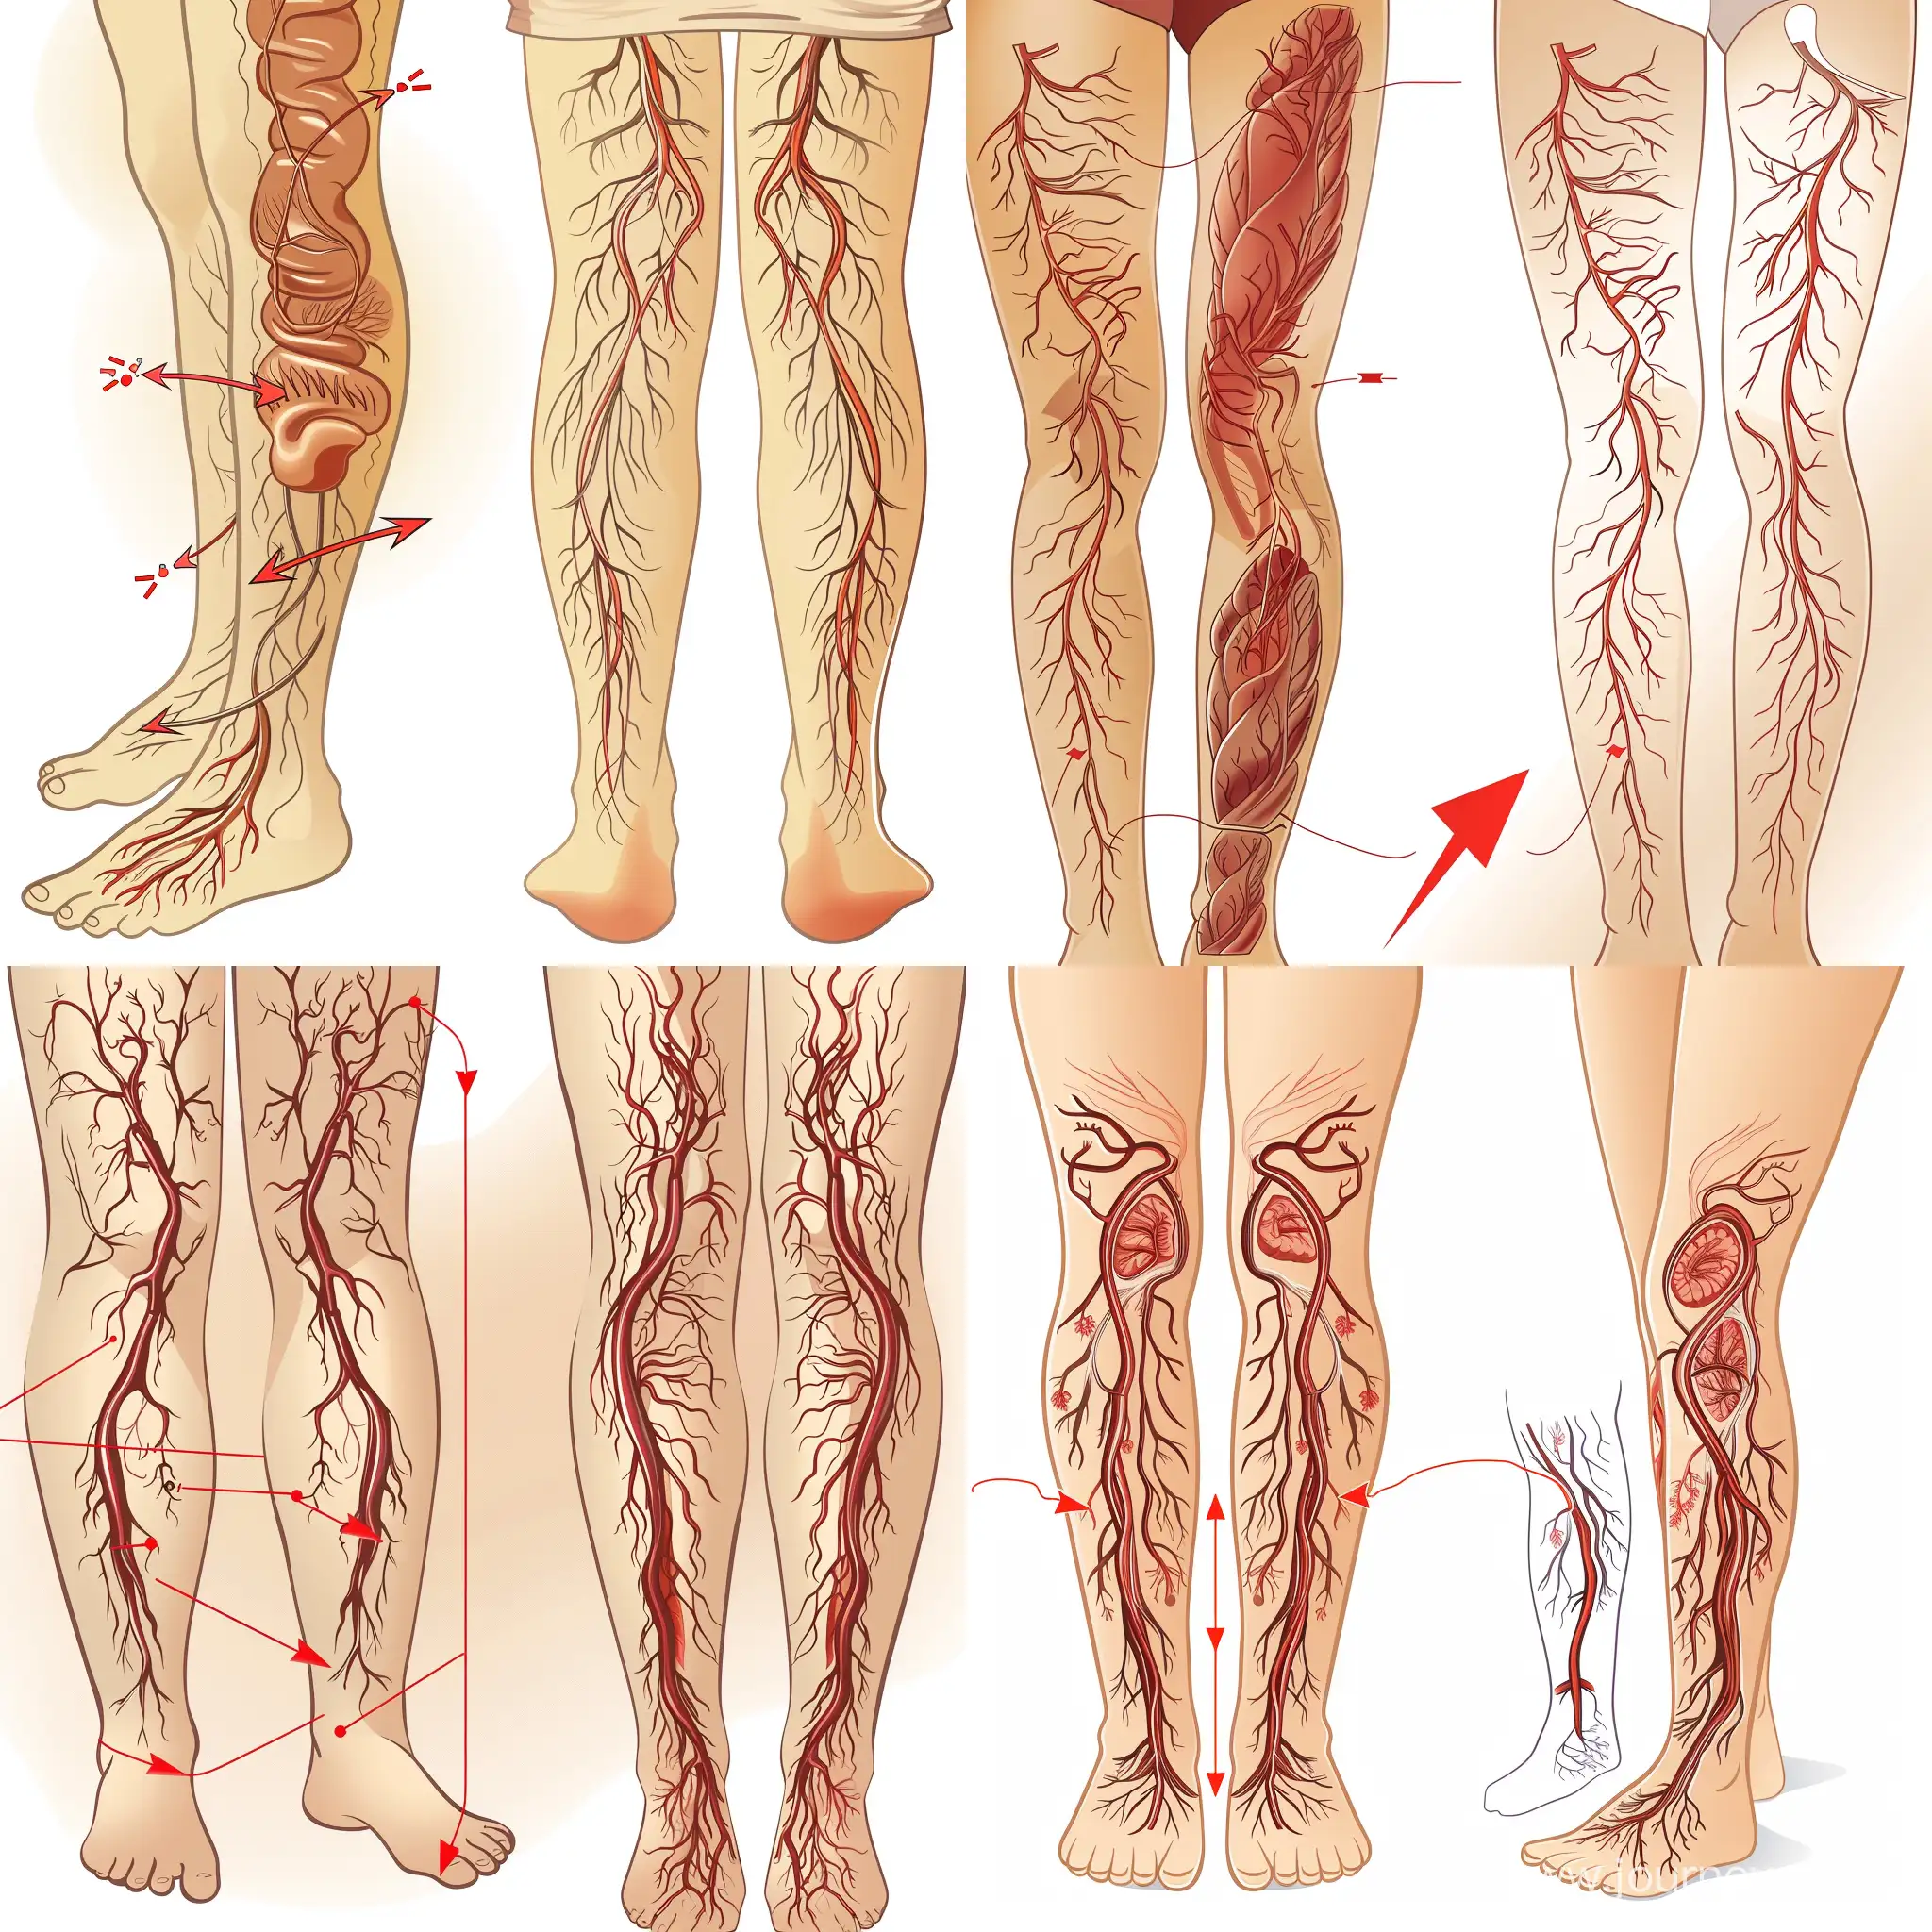 The image is made in the style of a vector drawing. The image features a person's legs with varicose veins, accompanied by a diagram of a healthy leg. The varicose veins are marked with red arrows, highlighting the issue. This image can be used to educate people about the importance of maintaining good leg health and the potential consequences of neglecting it. The diagram of a healthy leg serves as a visual representation of the desired outcome, emphasizing the need for proper care and prevention. This image can be used in various contexts, such as promoting leg health products, raising awareness about varicose veins, or encouraging regular exercise and self-care routines to maintain healthy legs.